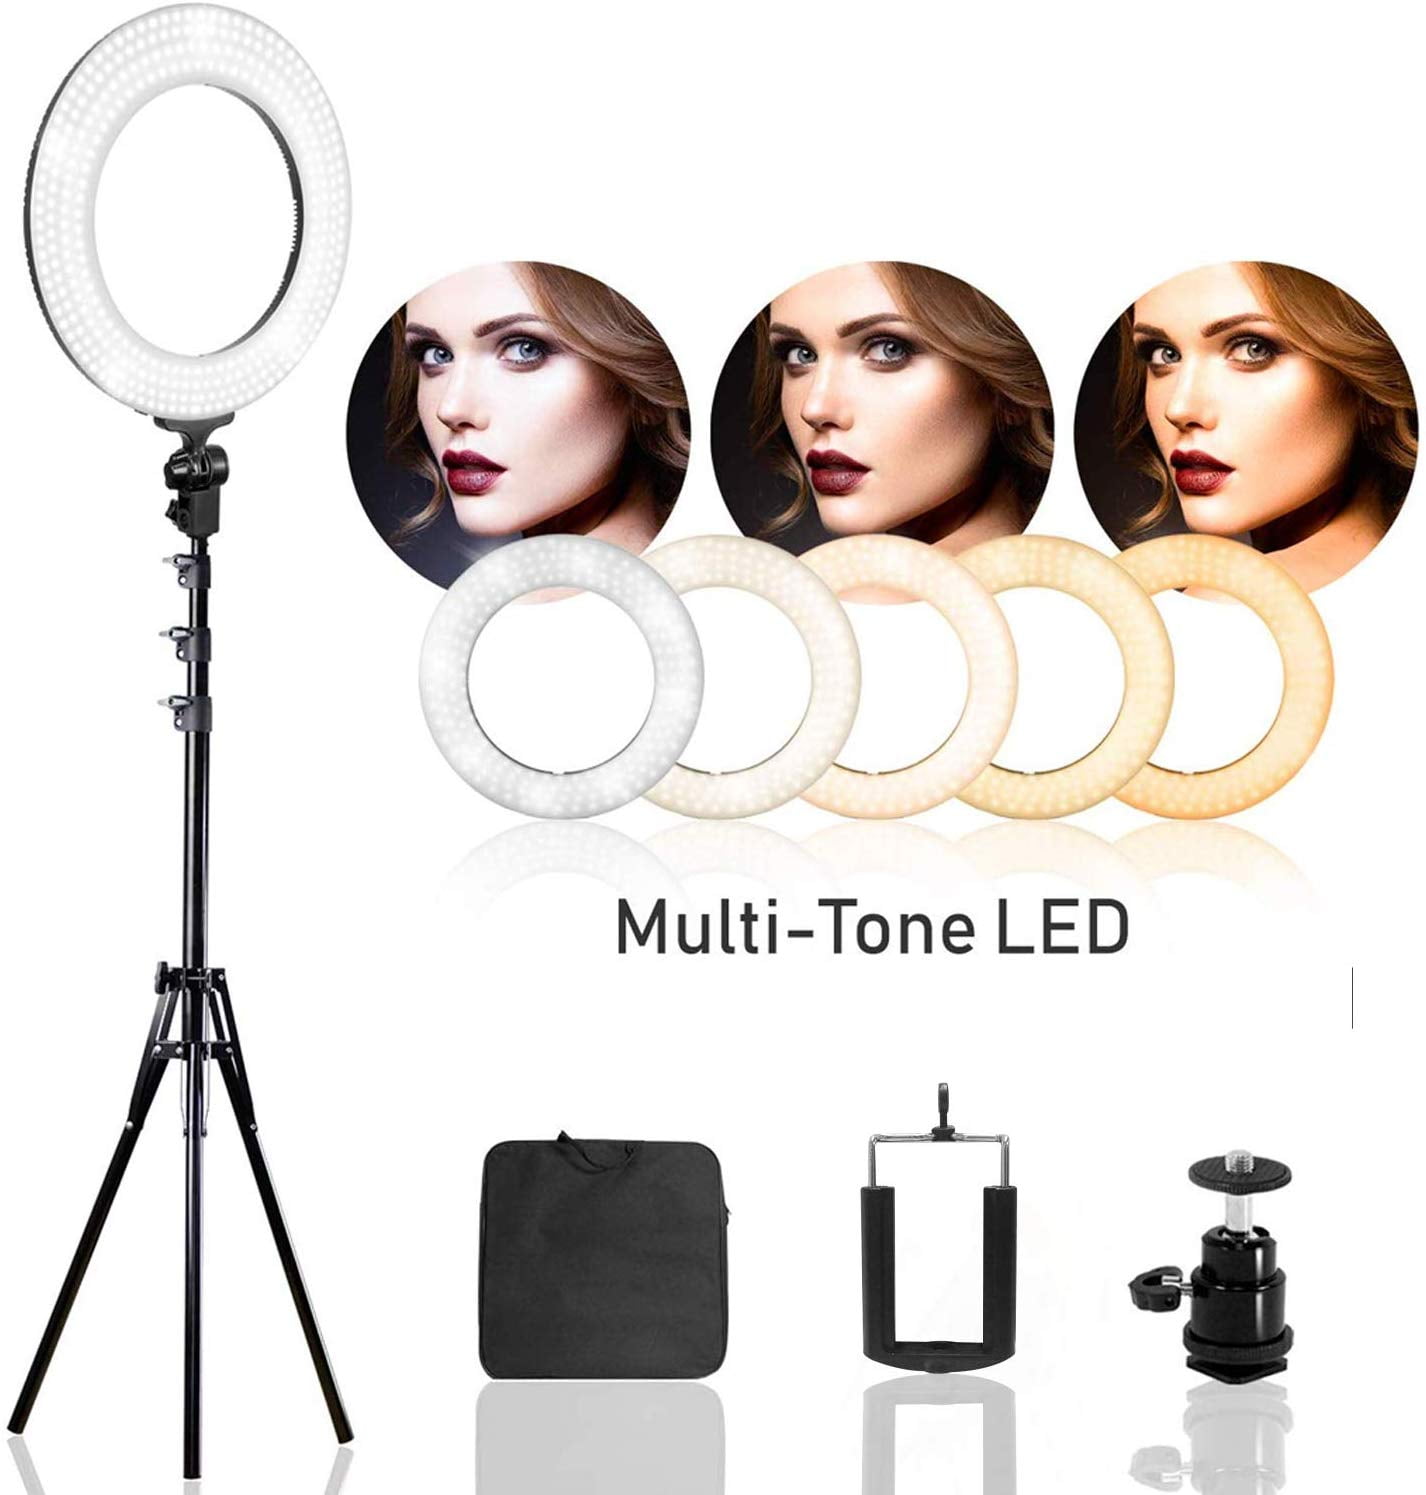 DonaldCosmetics - All sizes of very durable long lasting ring lights  available at donaldcosmetics at an affordable price 10” 12” 14” 16” 18” 21”  Rechargeable and non rechargeable all available Visit us @